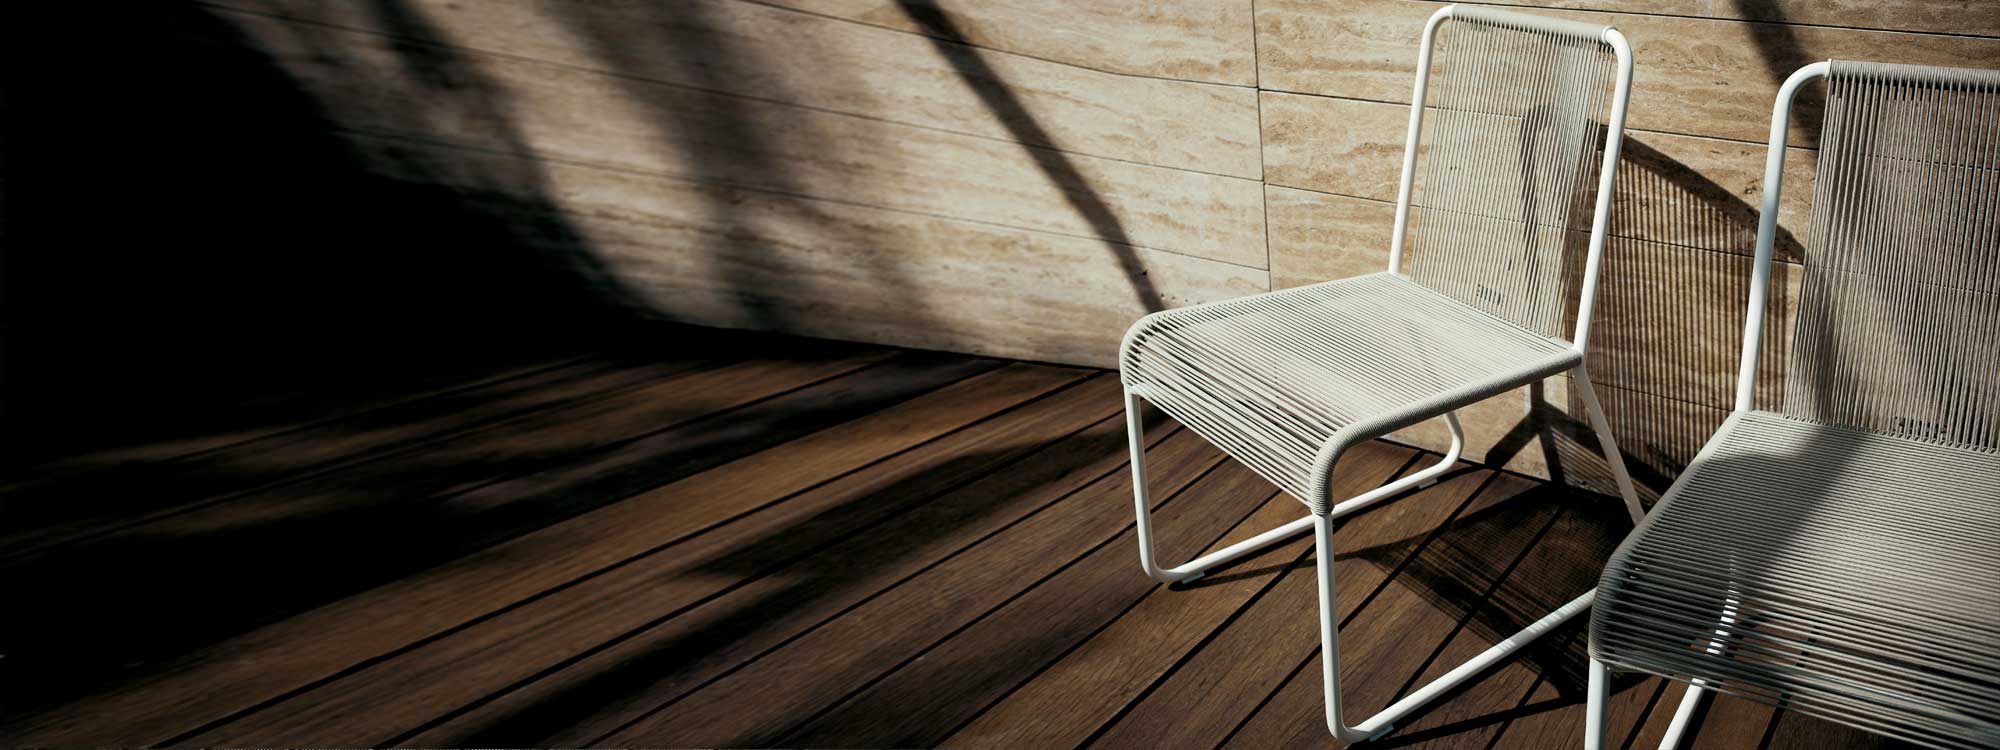 Image of pair of RODA Harp white garden chairs with sand acrylic cord seat and back shown on wooden decking in light and shade